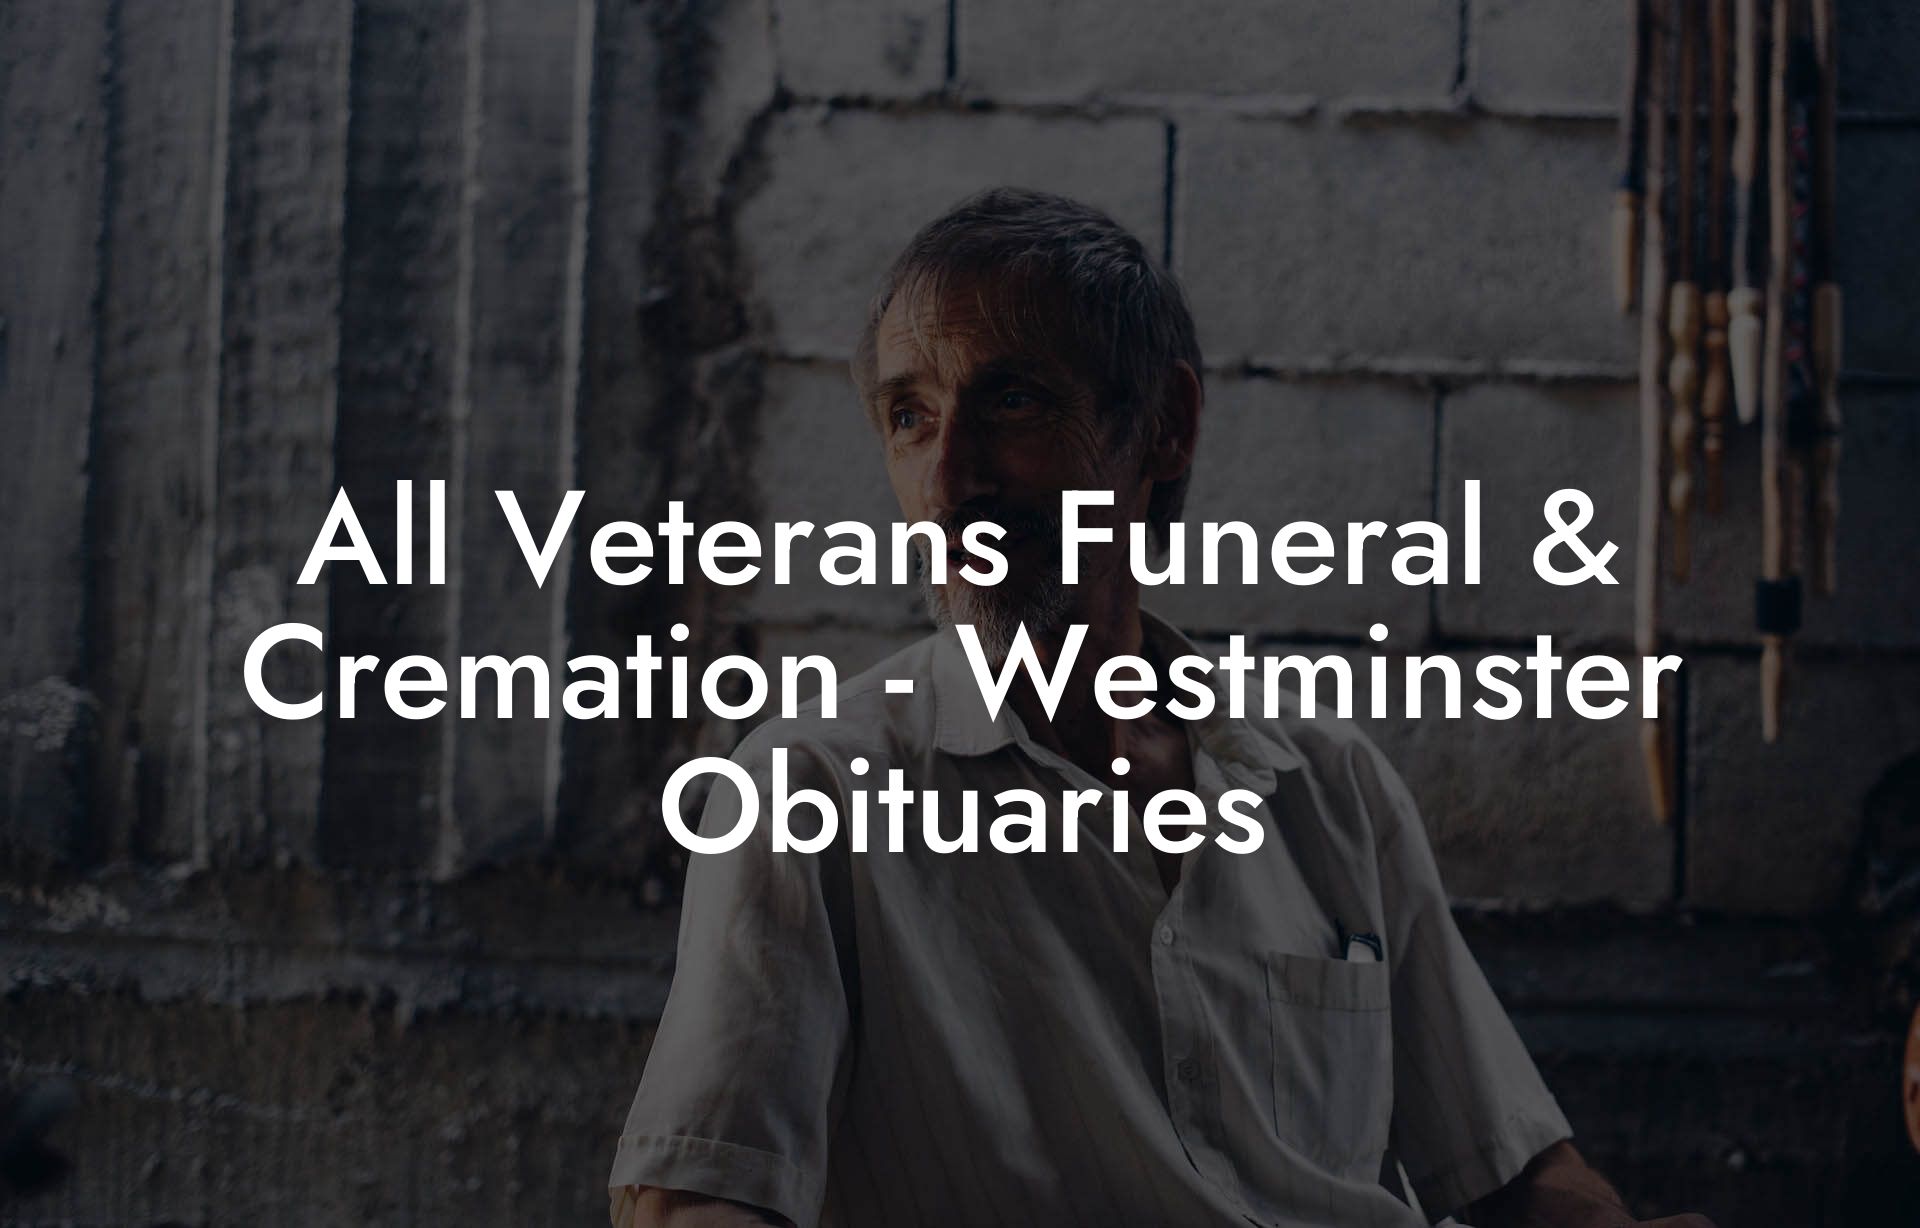 All Veterans Funeral & Cremation - Westminster Obituaries